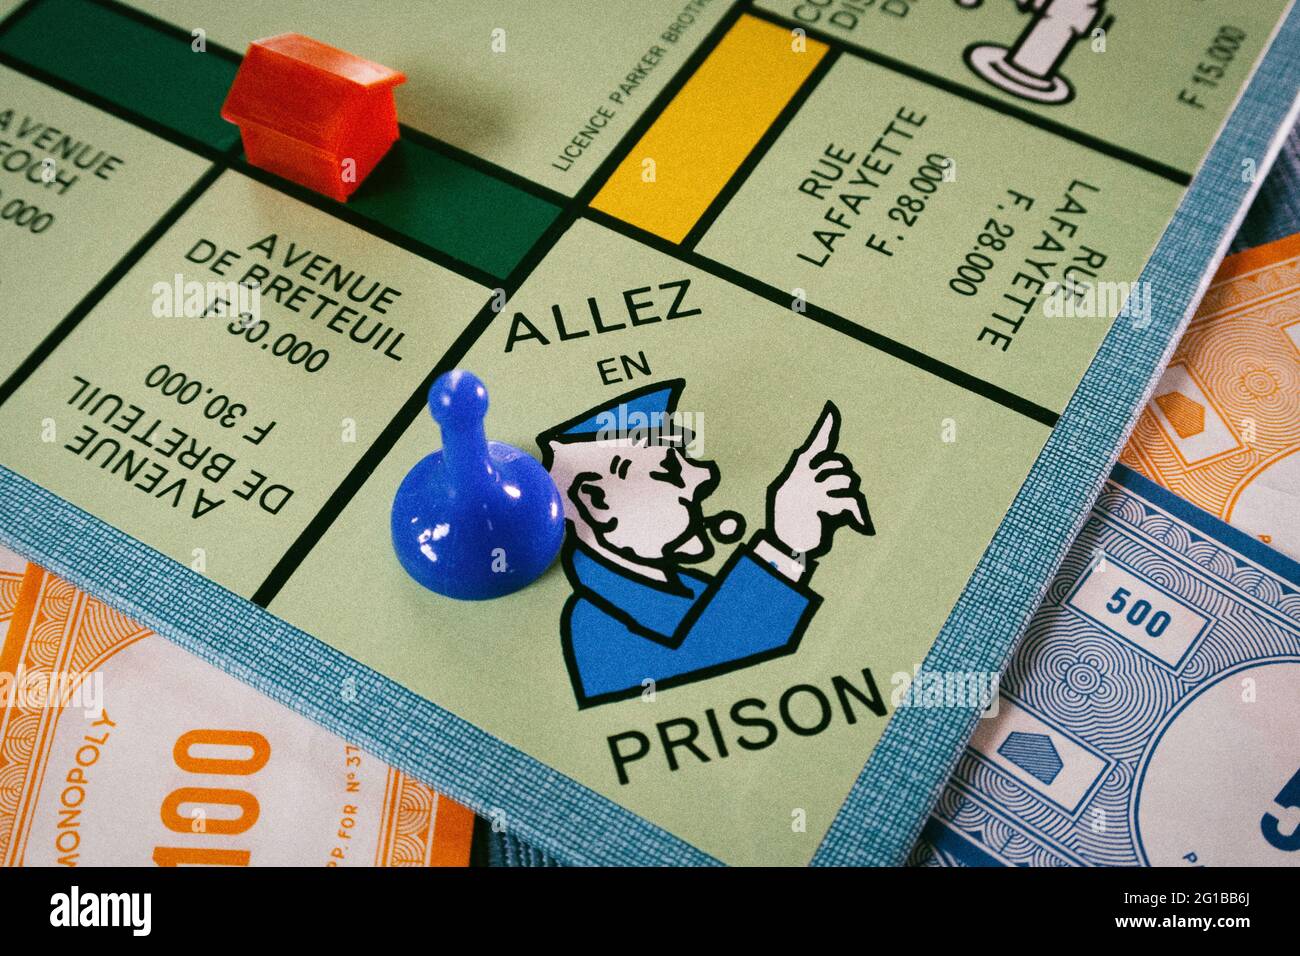 French language version of the Monopoly board game. Stock Photo